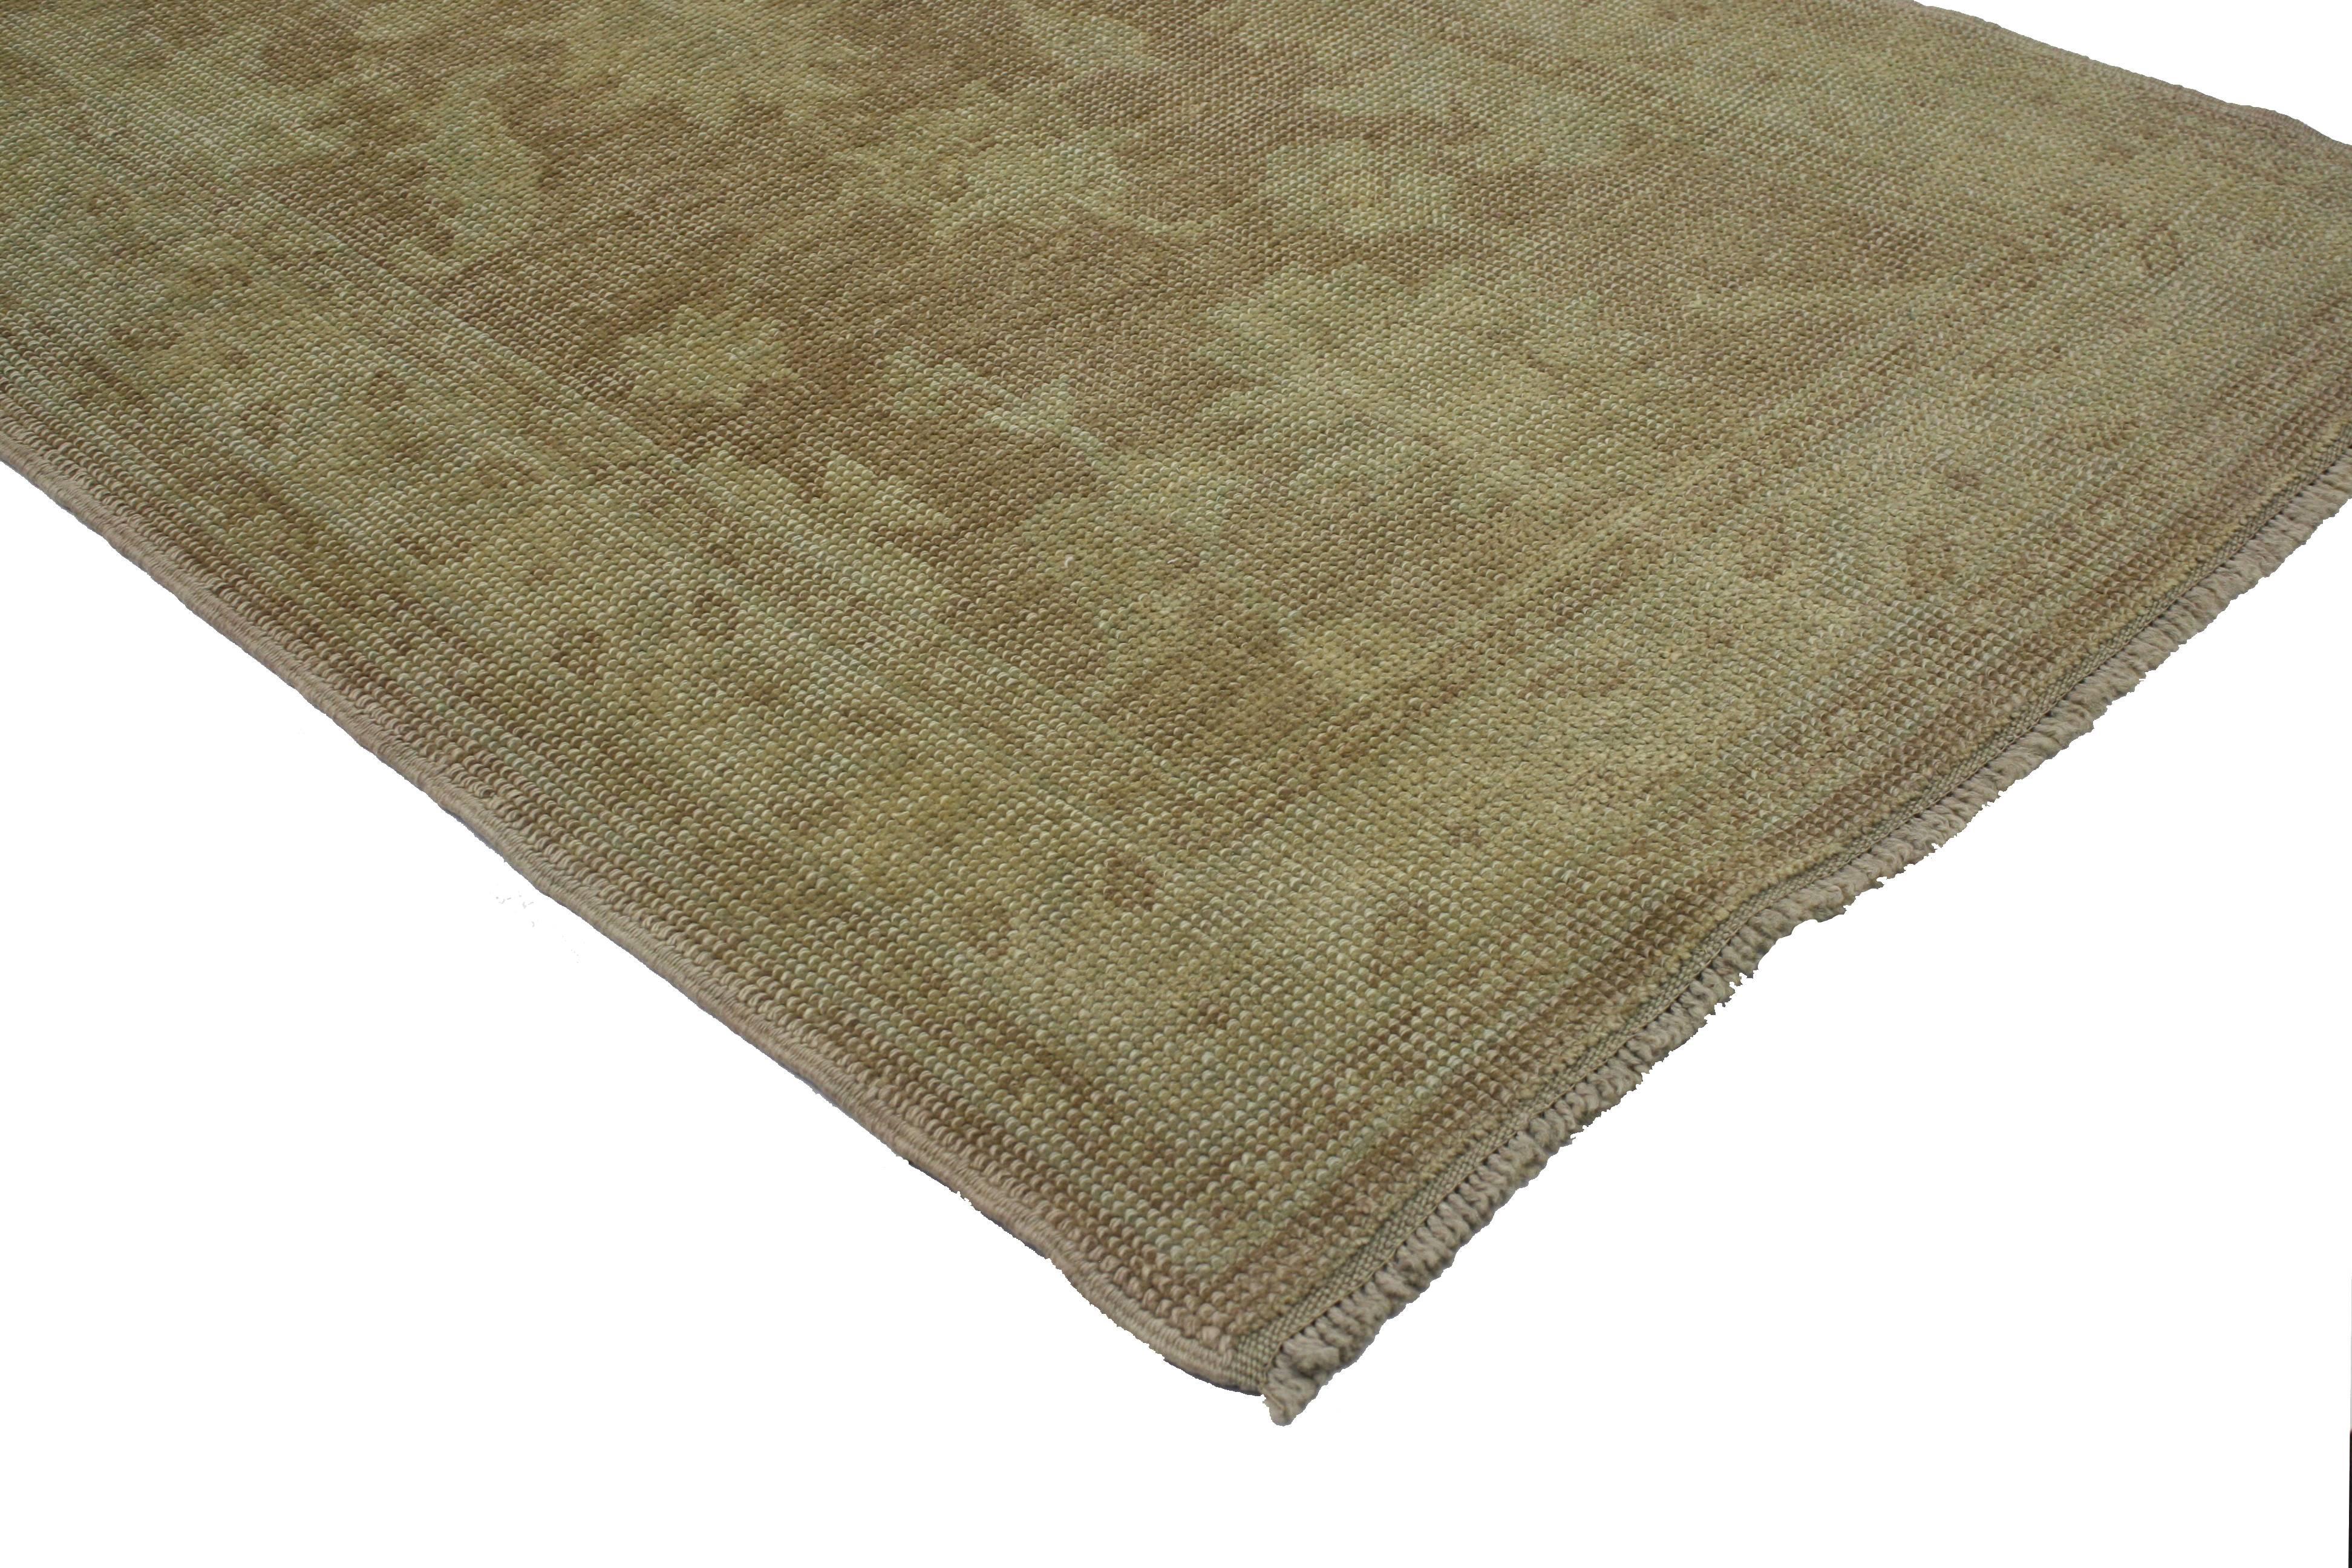 51622 Modern Turkish Oushak Runner with Transitional Style and Muted Warm Colors 02'08 x 13'01. Warm and inviting, this hand-knotted wool modern Turkish Oushak runner features an all-over large scale geometric pattern composed of Harshang-style